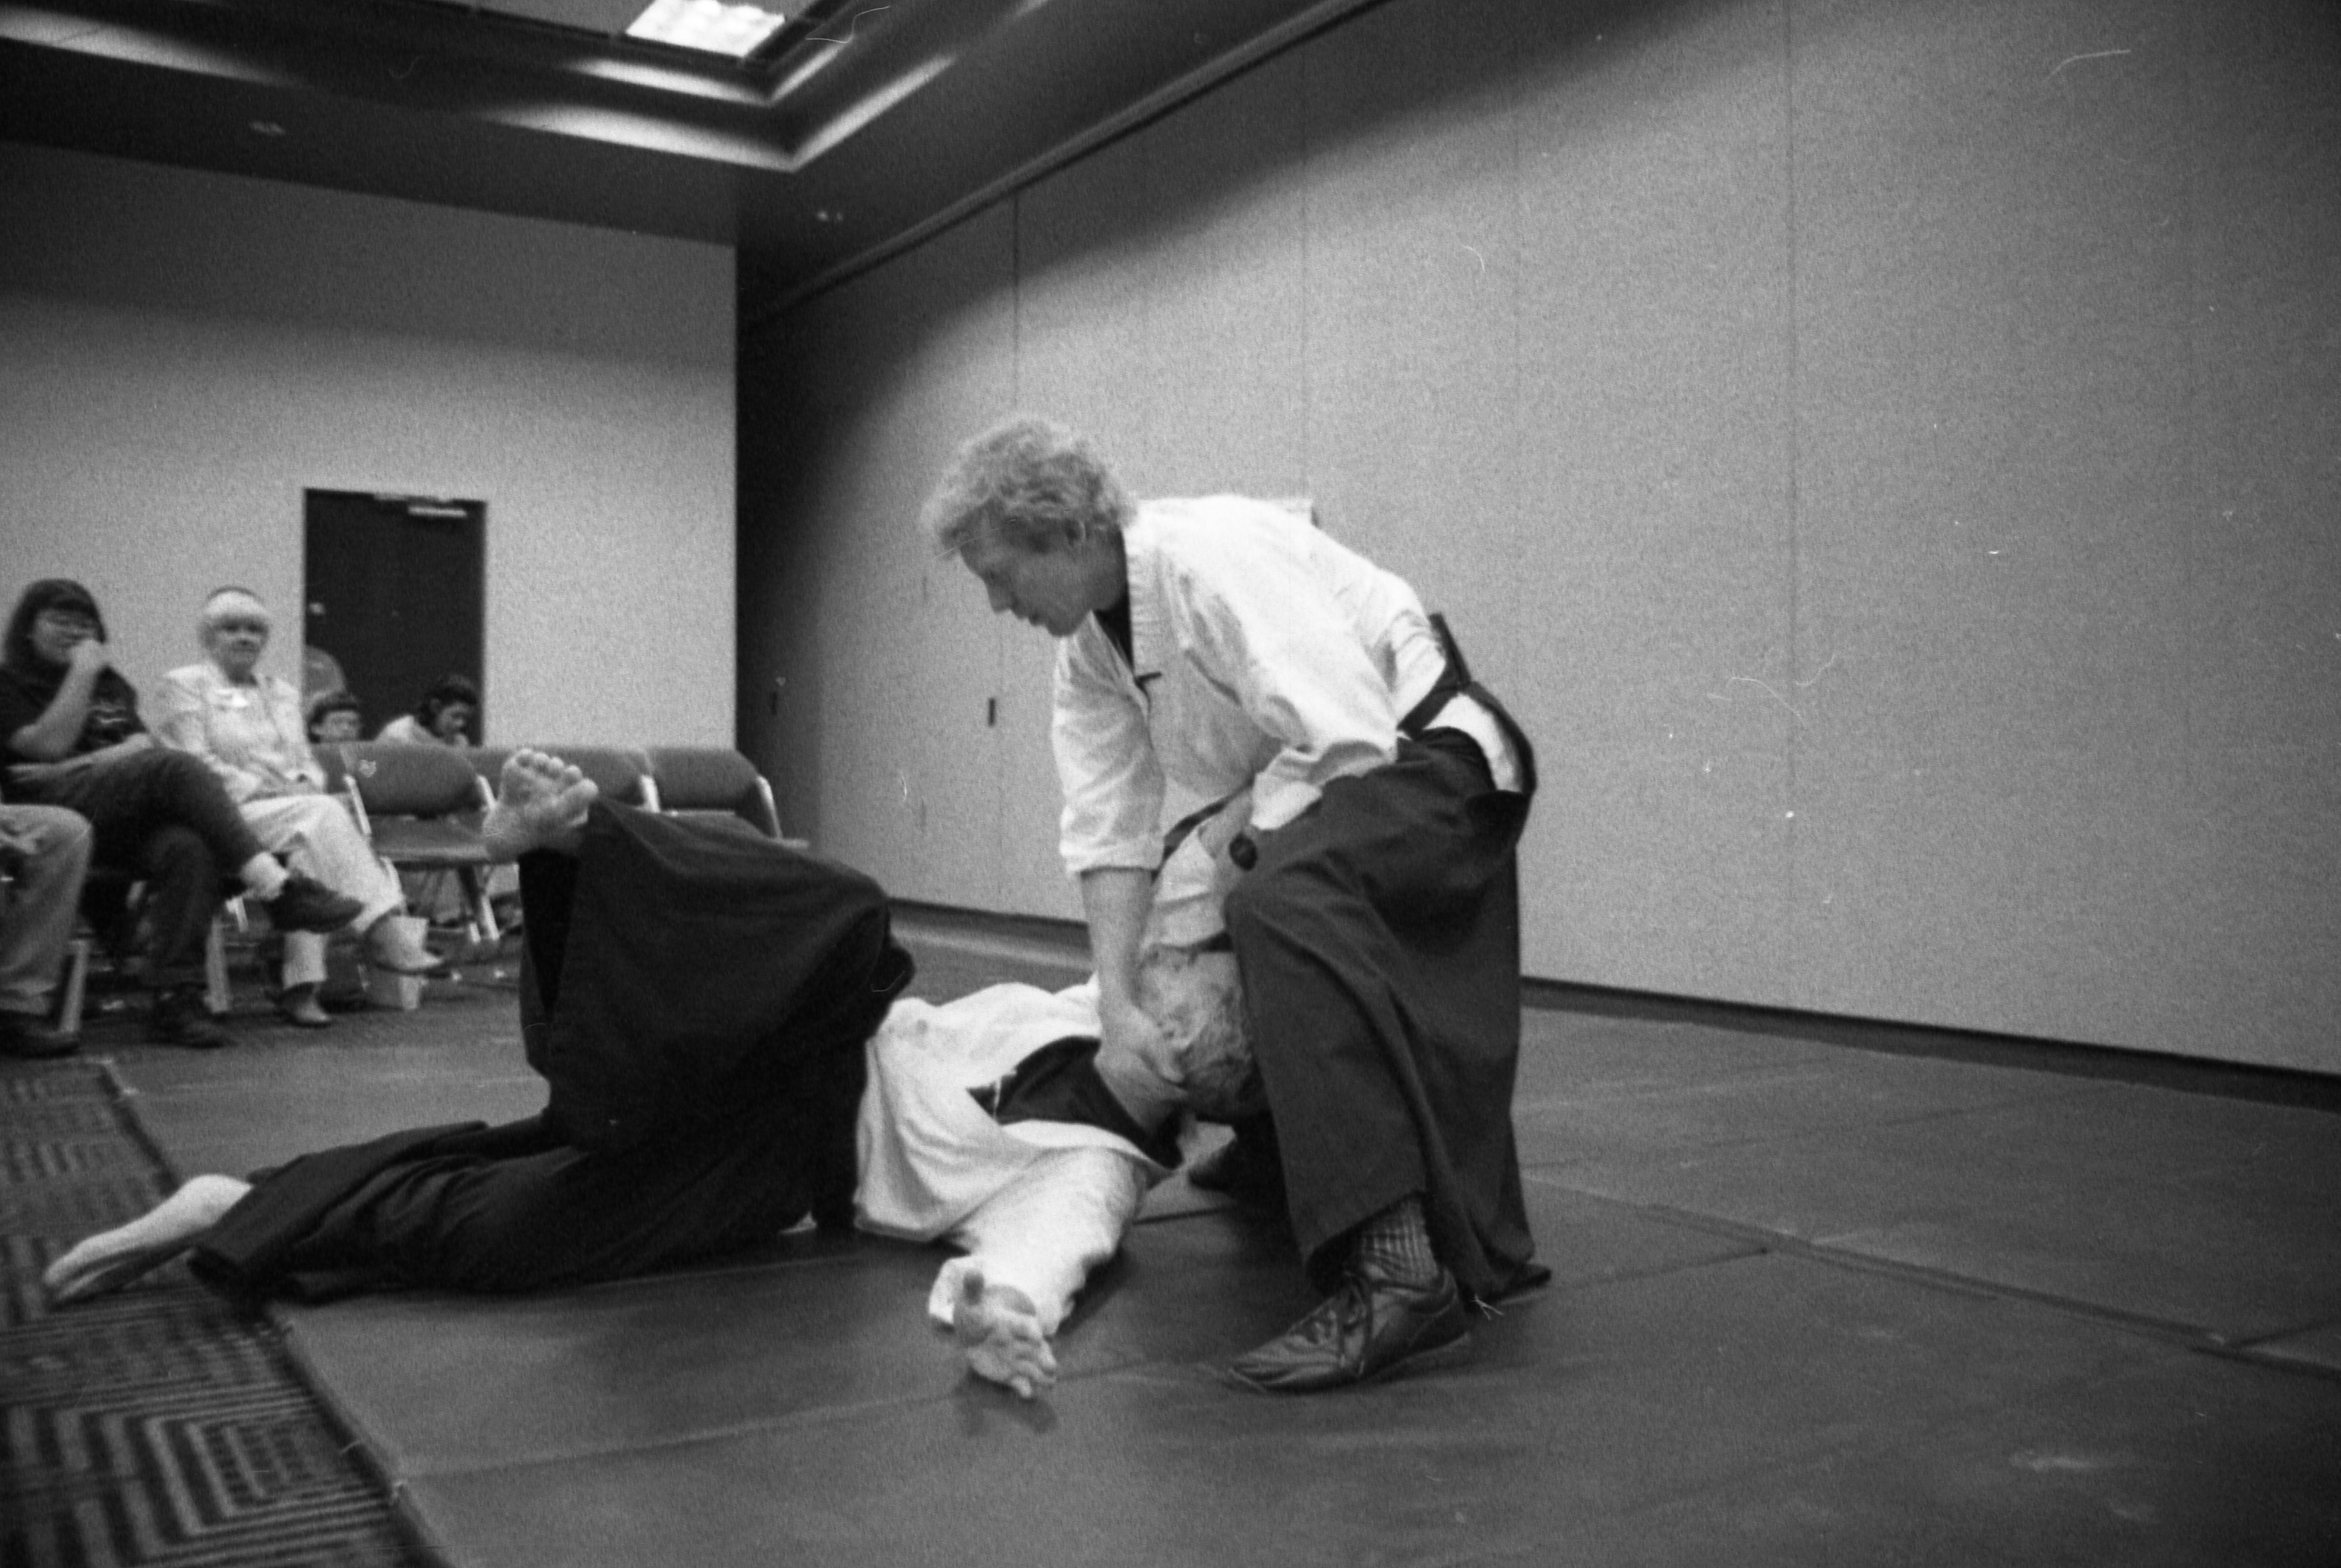 While demonstrating the art of aikido, one bouts with another man; both are clothed in white shirts